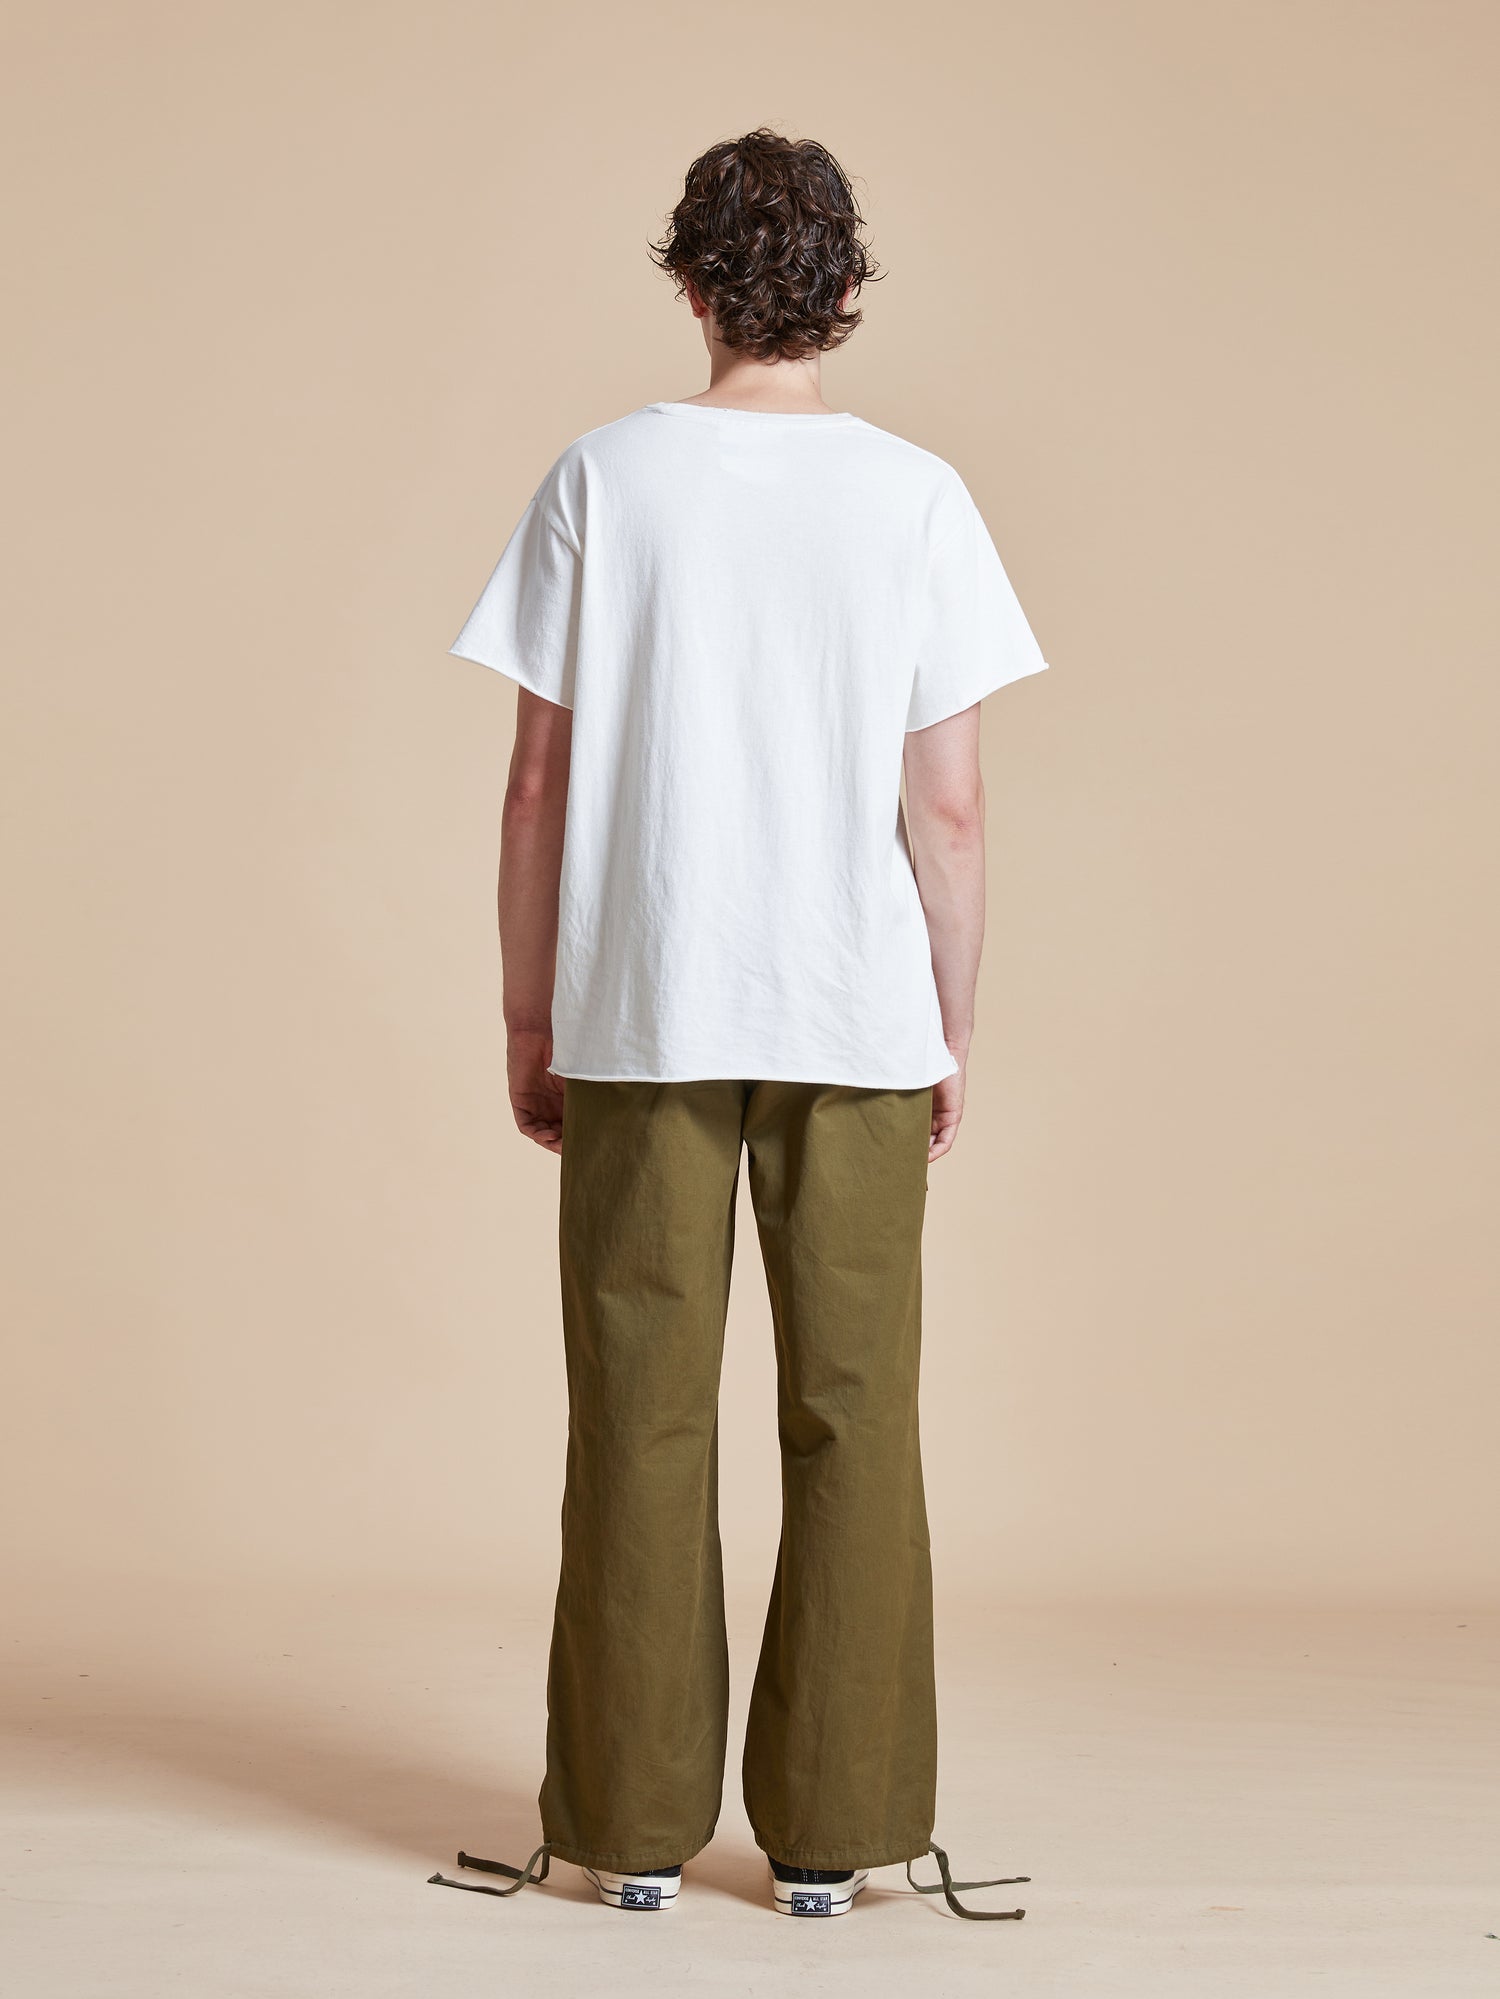 The back view of a man wearing a white t-shirt and Found Parachute Cargo Twill Pants.